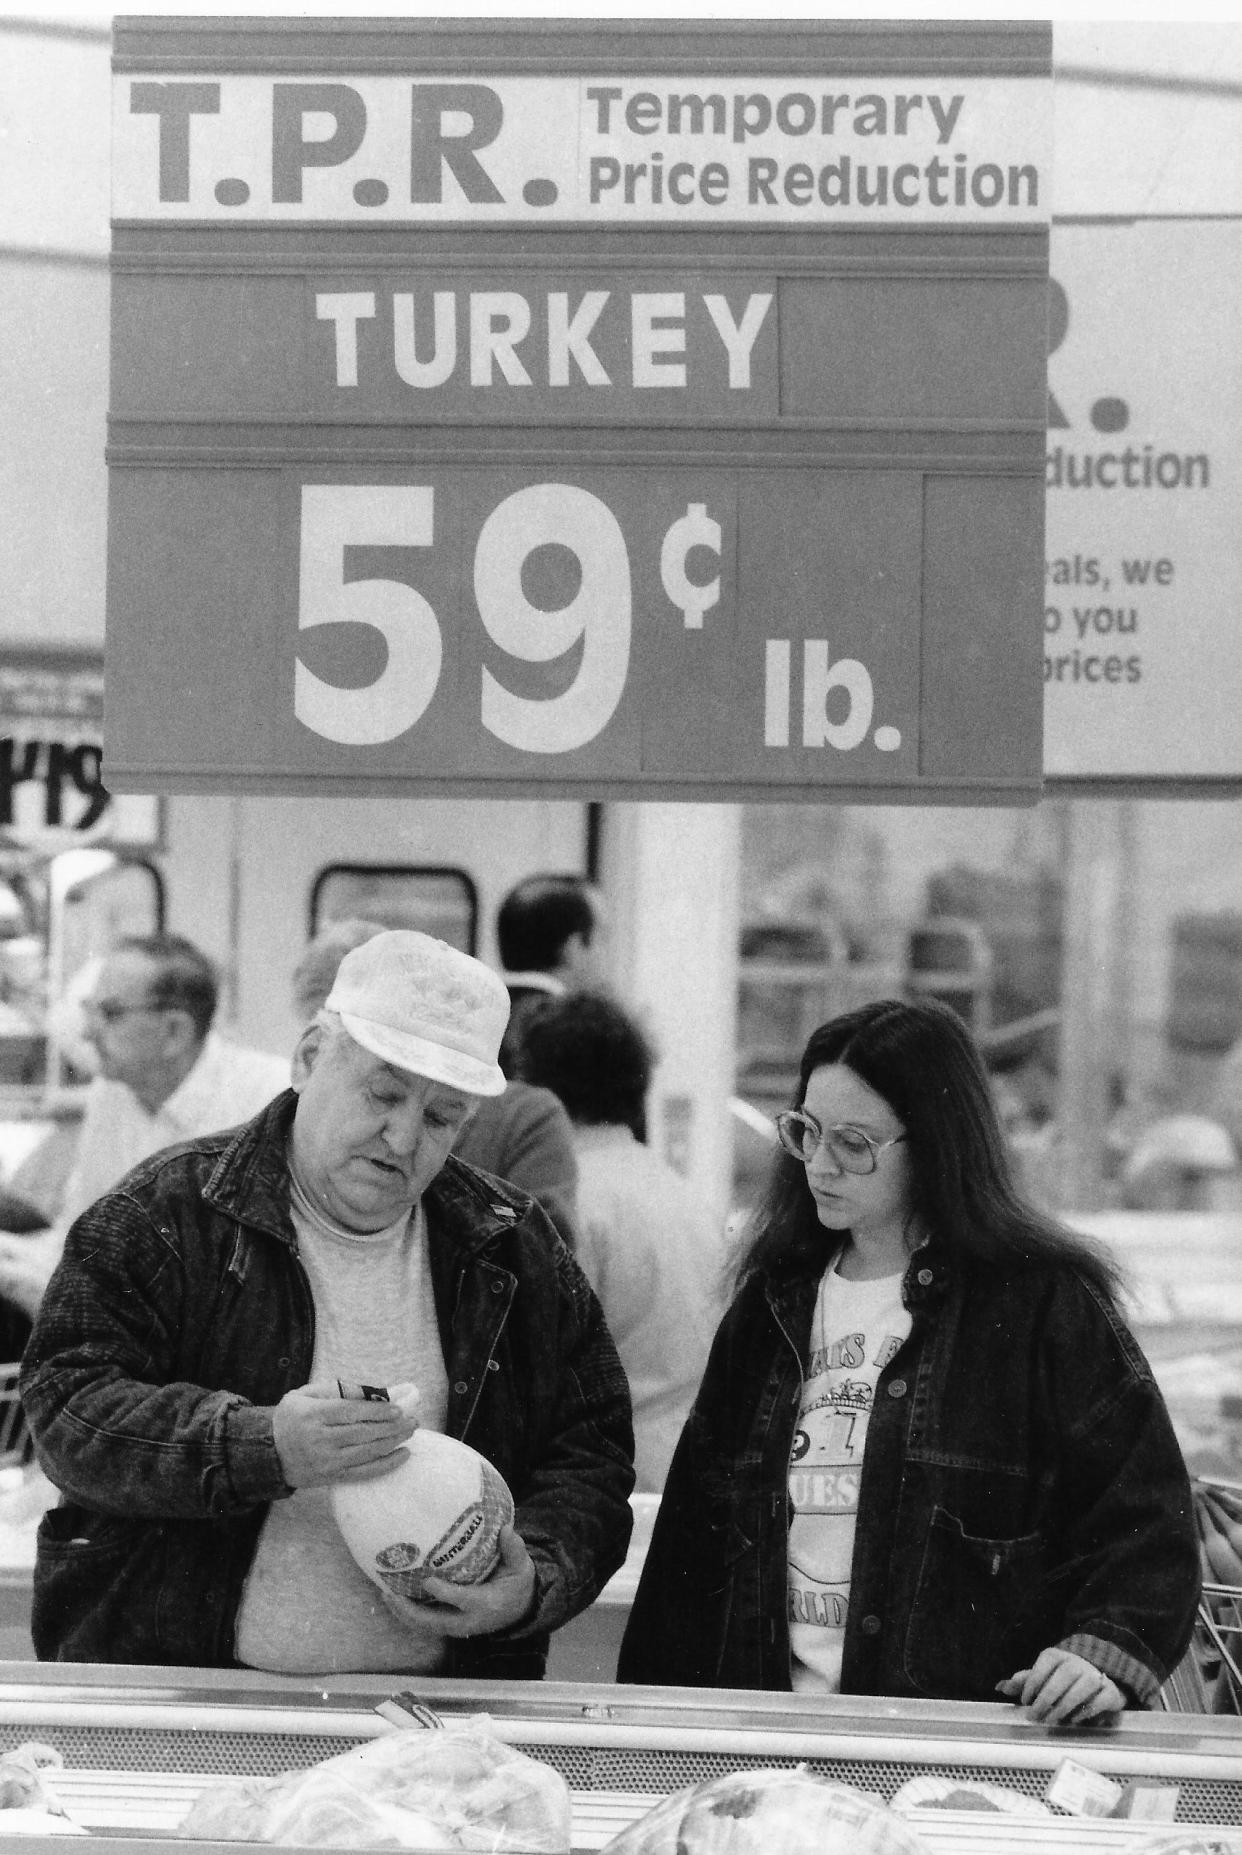 Kenmore neighbors Les McDowell and Sue Greene look at turkeys in the meat section of the Twin Valu store in Cuyahoga Falls on March 6, 1989. The 24-hour store offered turkey at a “temporary price reduction” of 59 cents a pound at the grand opening.